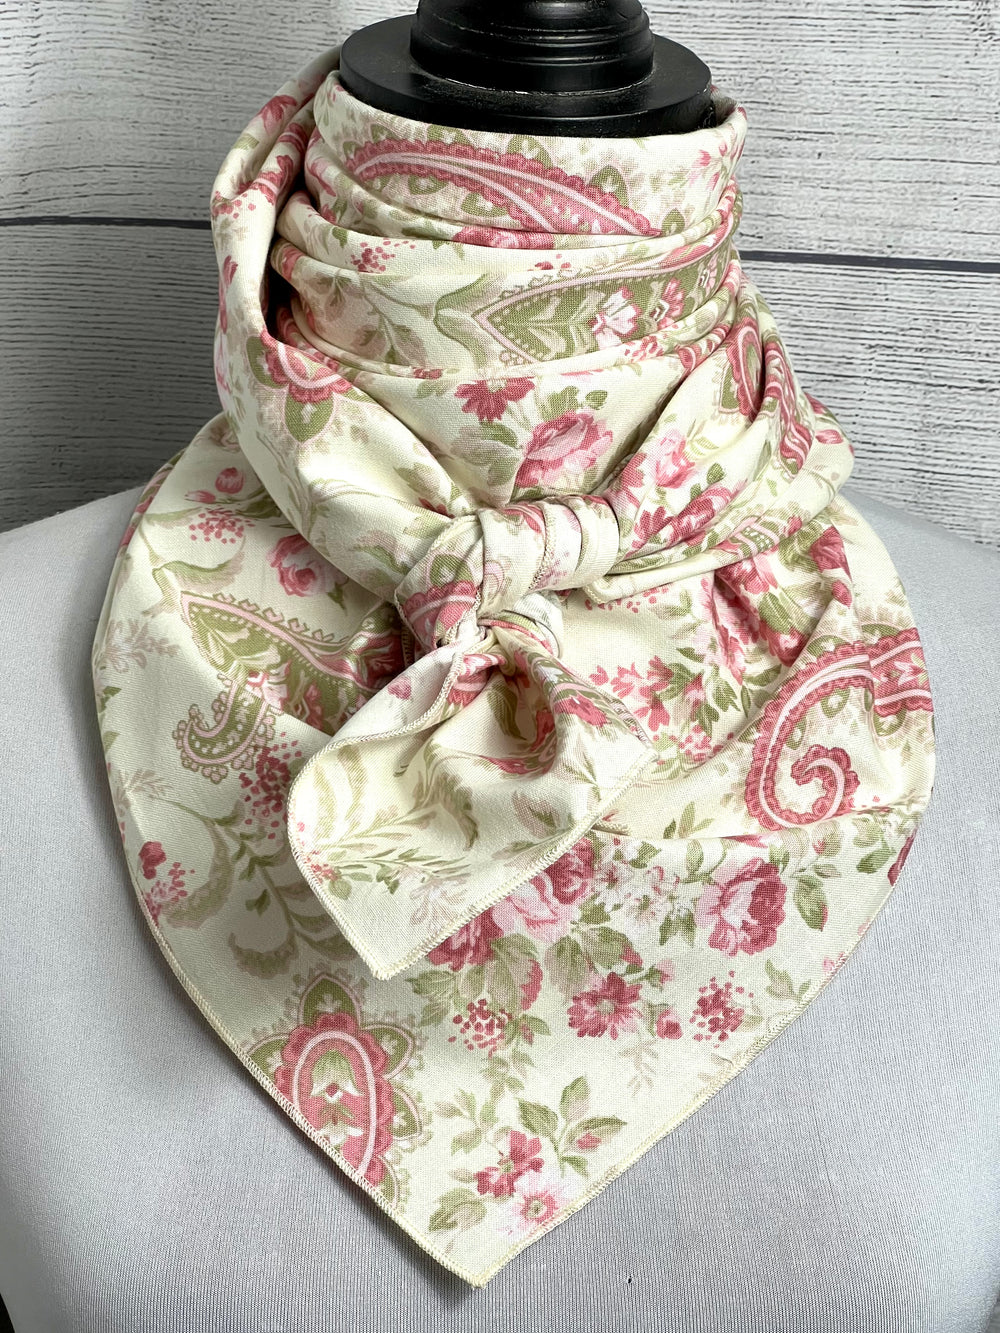 The Pearle Paisley Cotton Rag